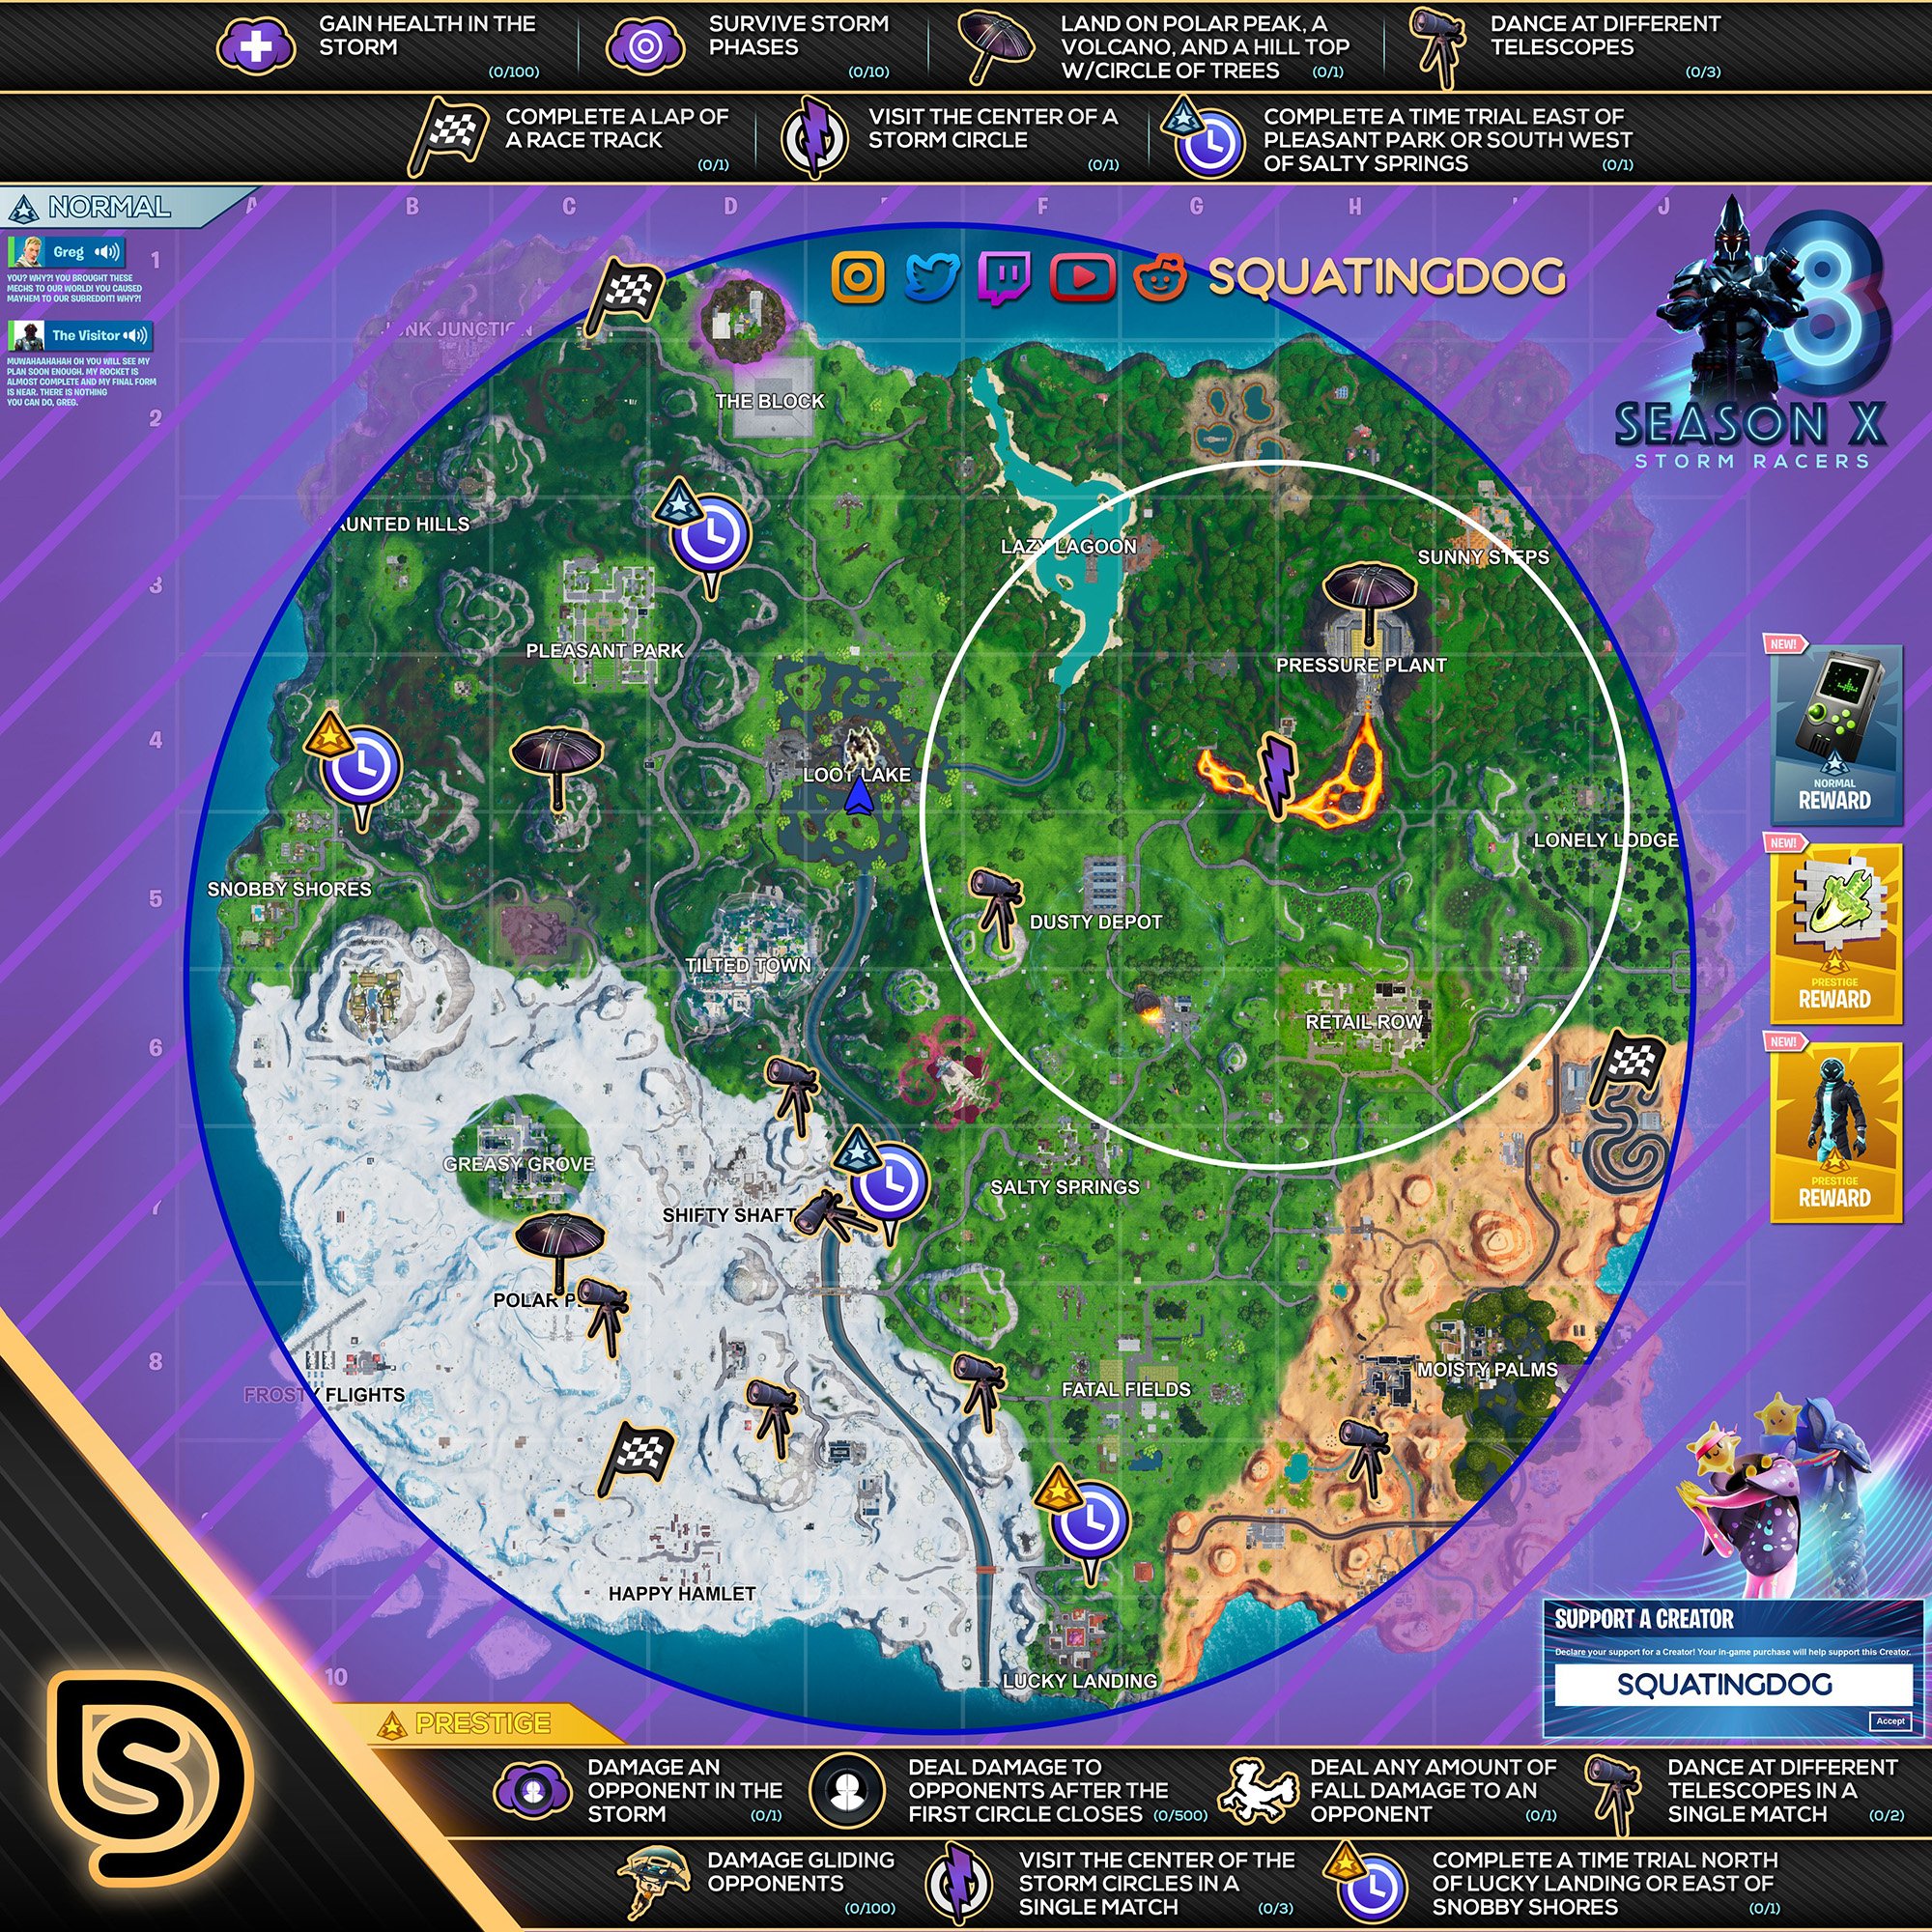 Fortnite Storm Racers Challenges Guide Cheat Sheet Missions Rewards Pro Game Guides - fortnite dance emotes roblox game secrets youtube